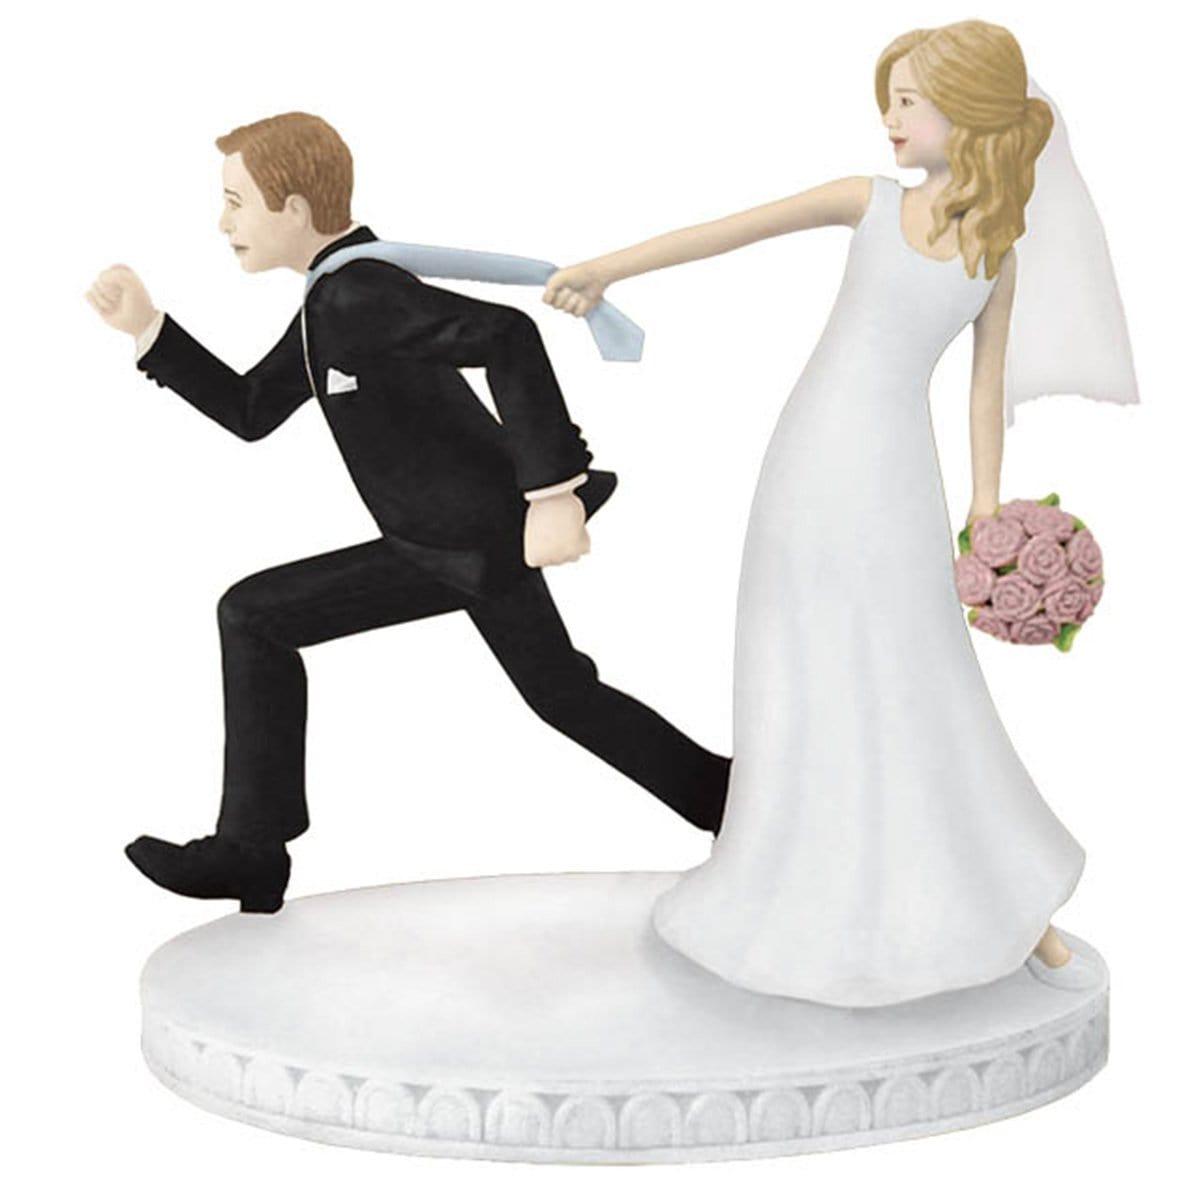 Buy Wedding Cake Topper - Tie Puller 4.12 In. sold at Party Expert